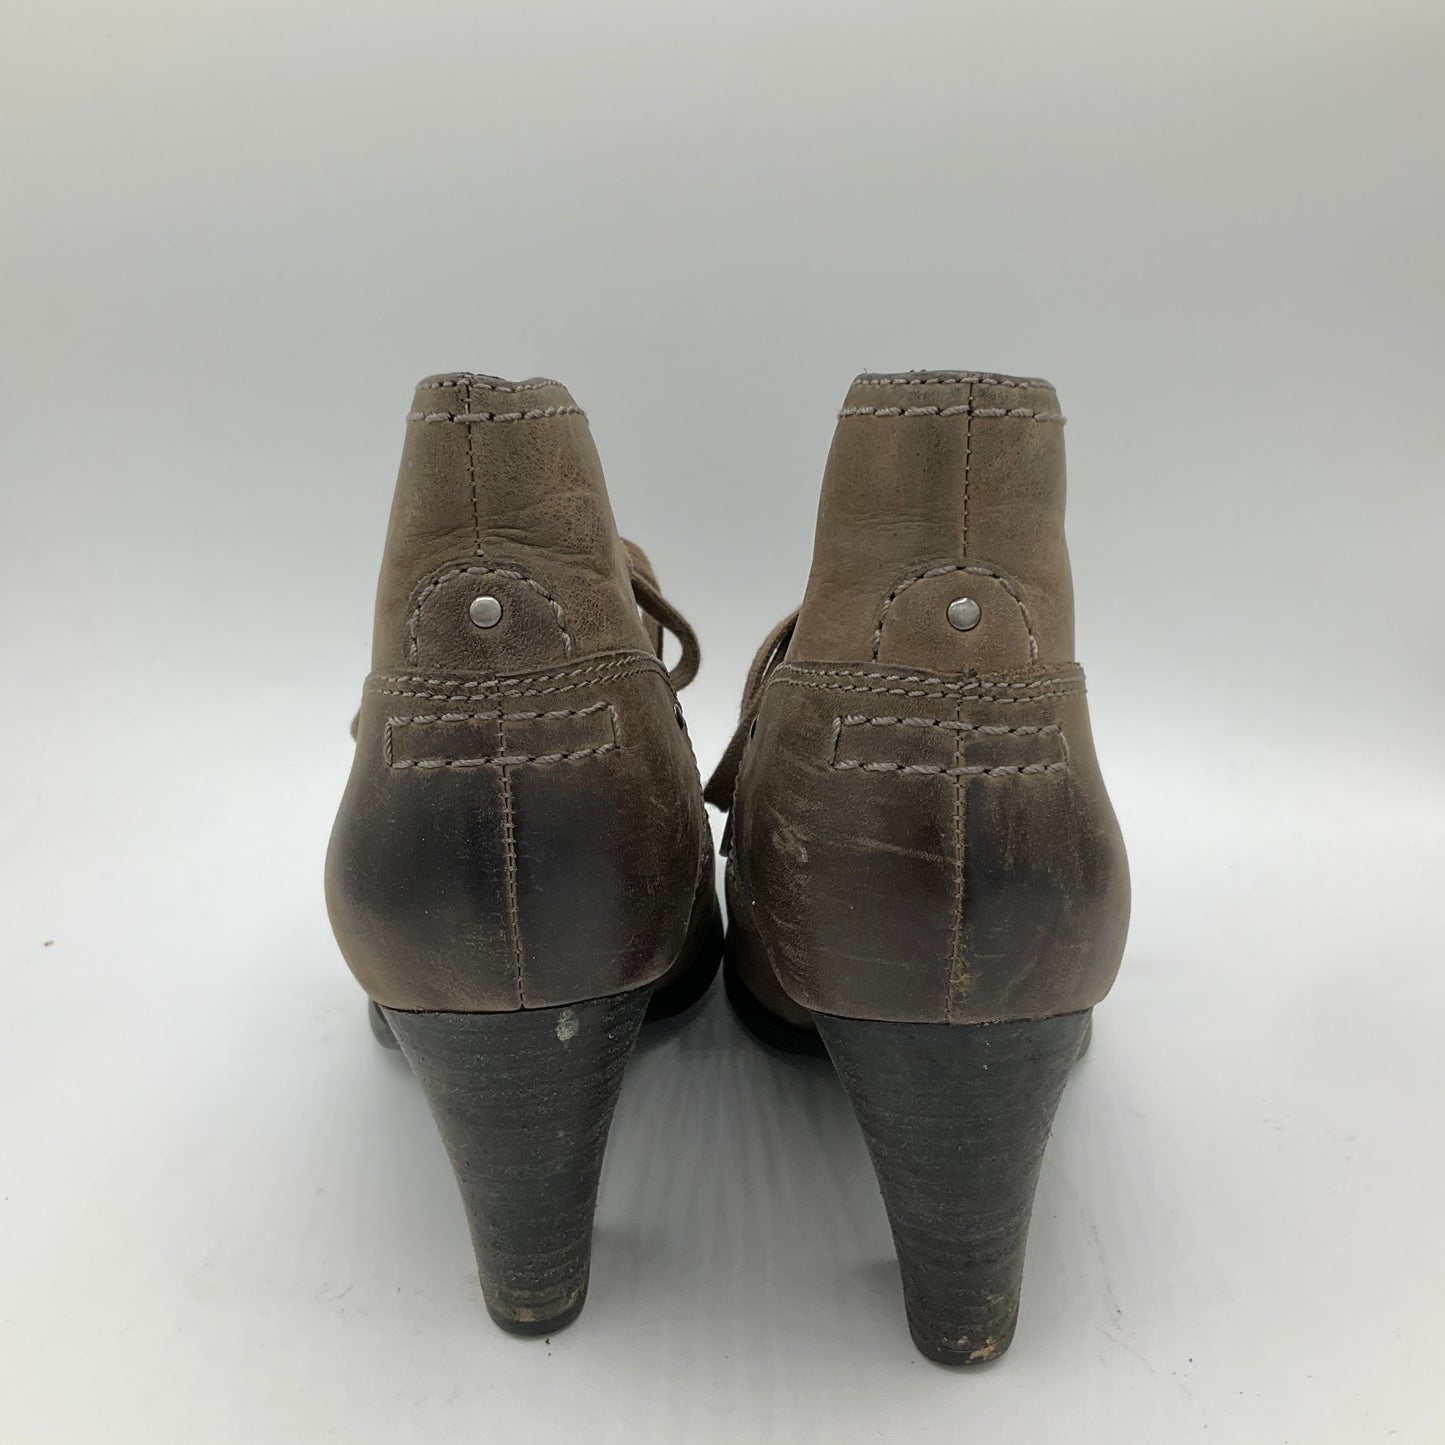 Boots Ankle Heels By Clarks  Size: 6.5